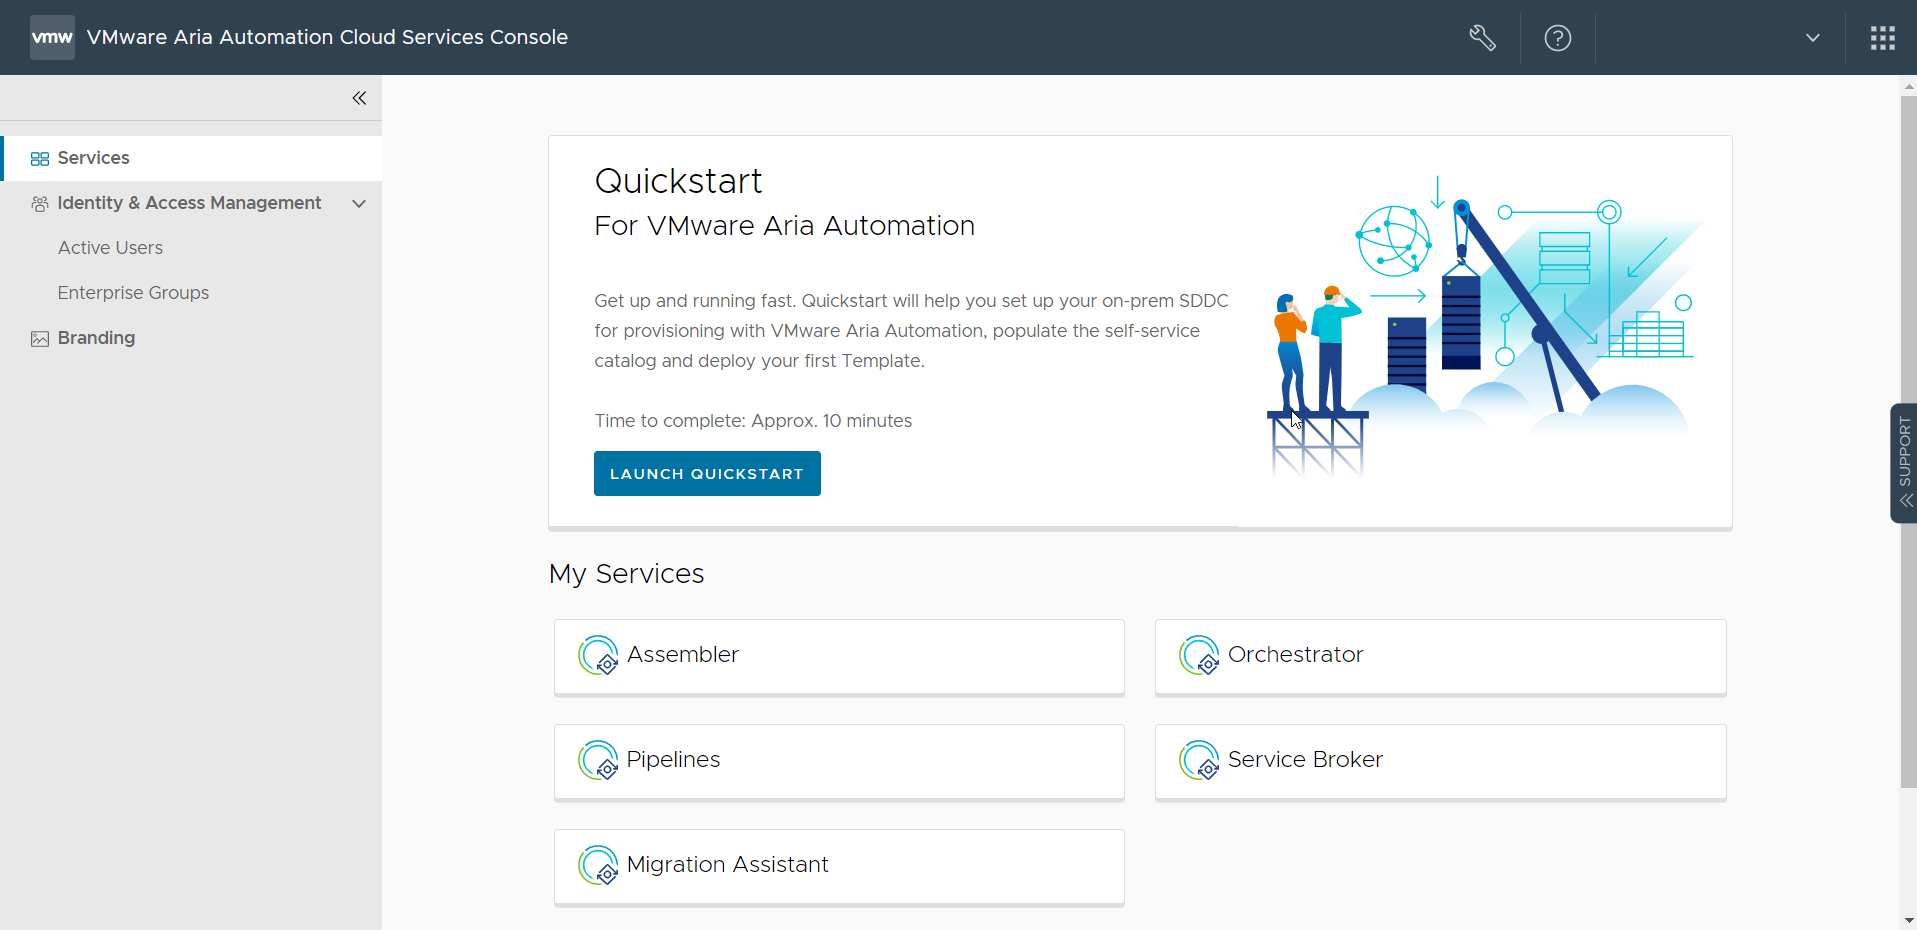 On the VMware Aria Automation landing page, you start the services for which you have permission.